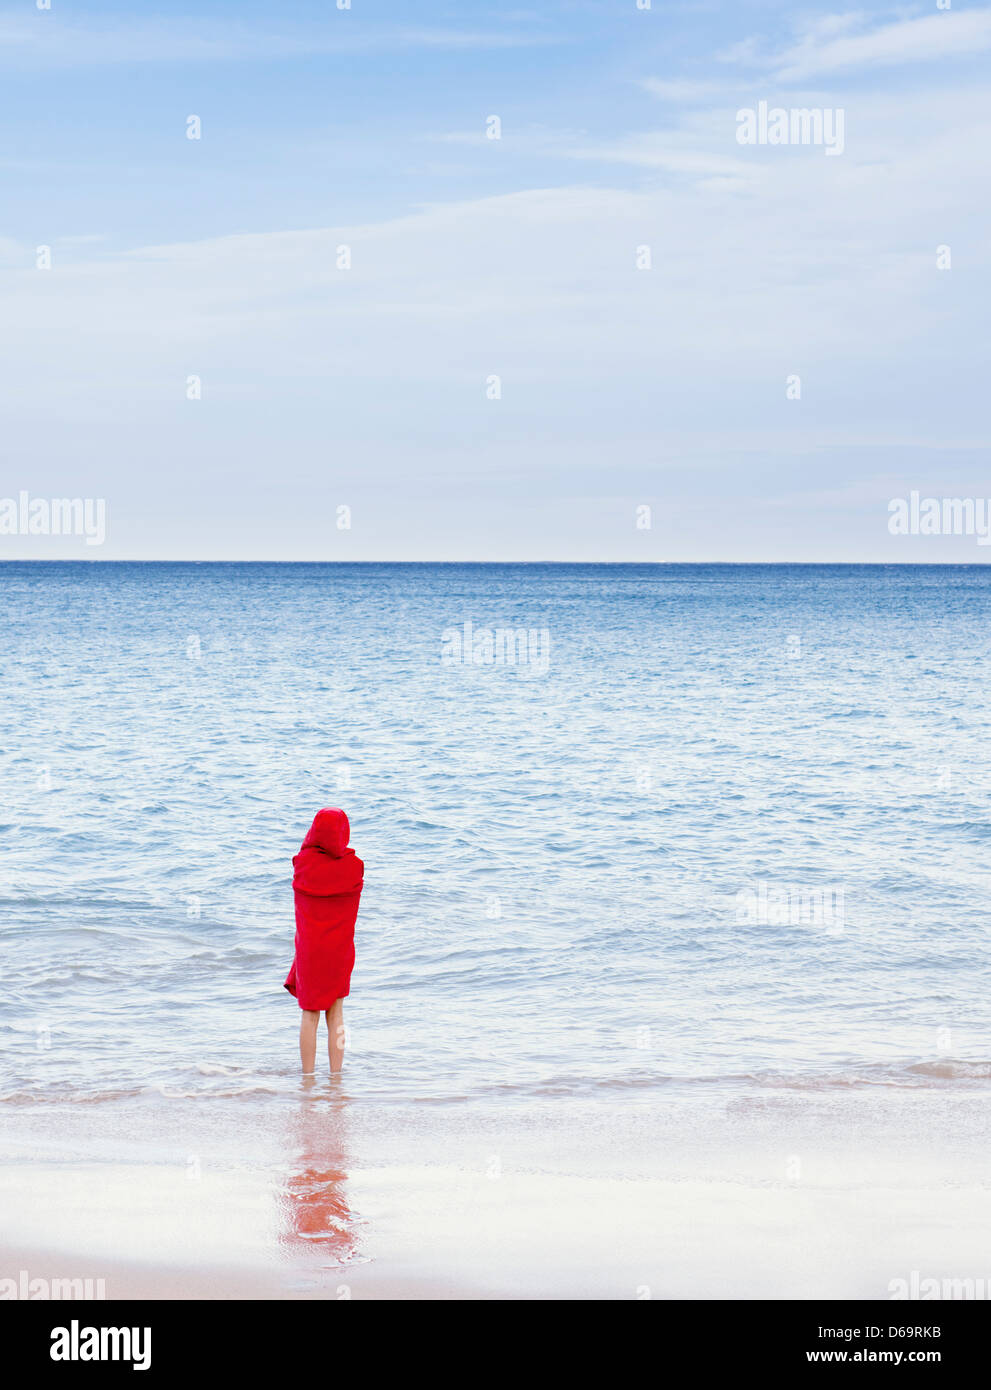 Girl standing in waves on beach Stock Photo